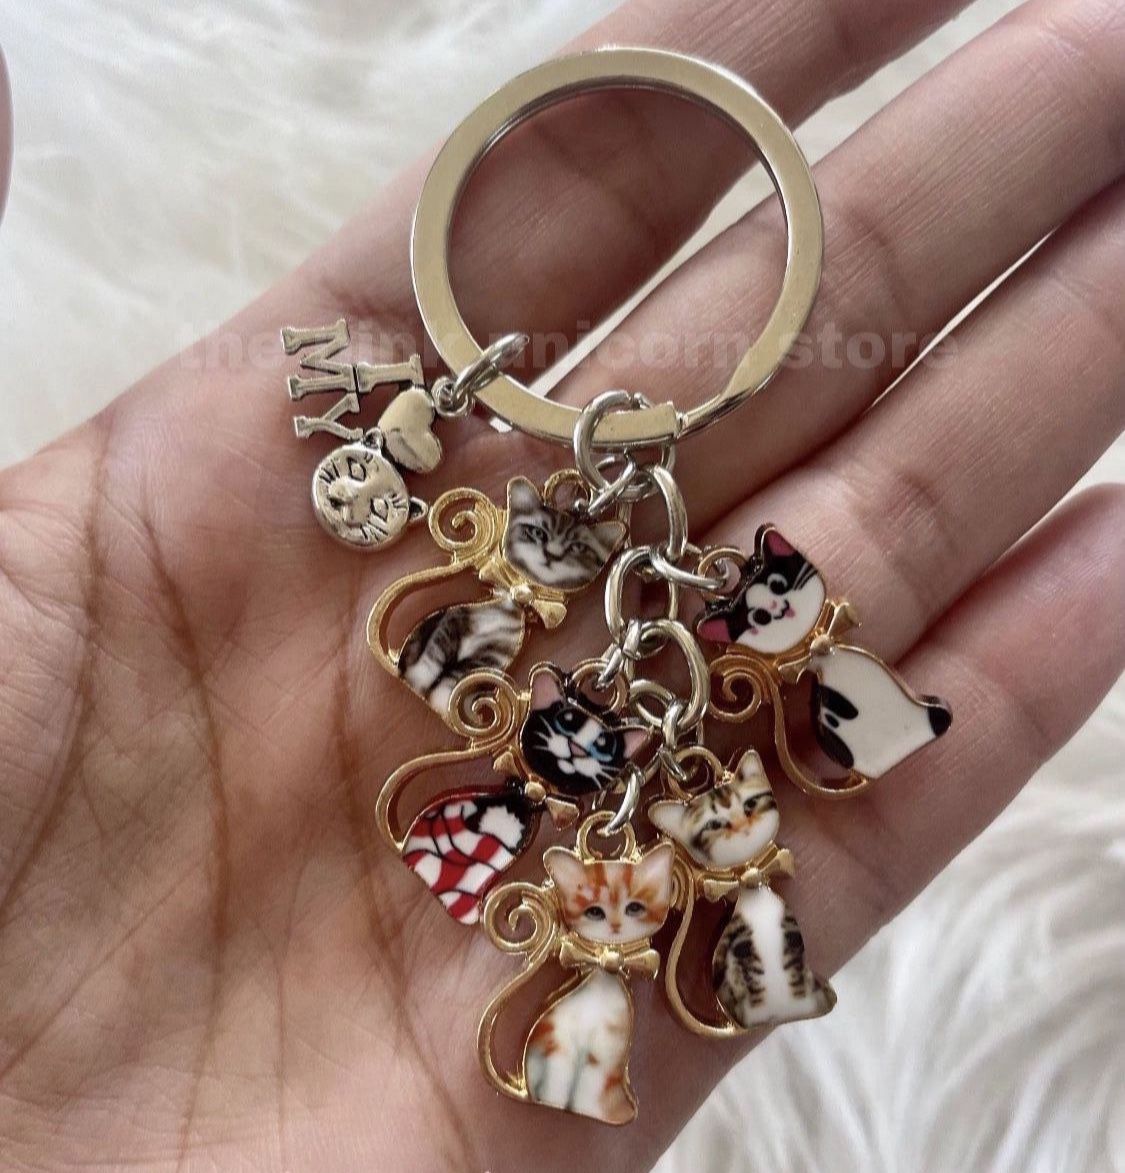 Brand New Crazy Cat Lady Charms Keychain Key Ring Gift 